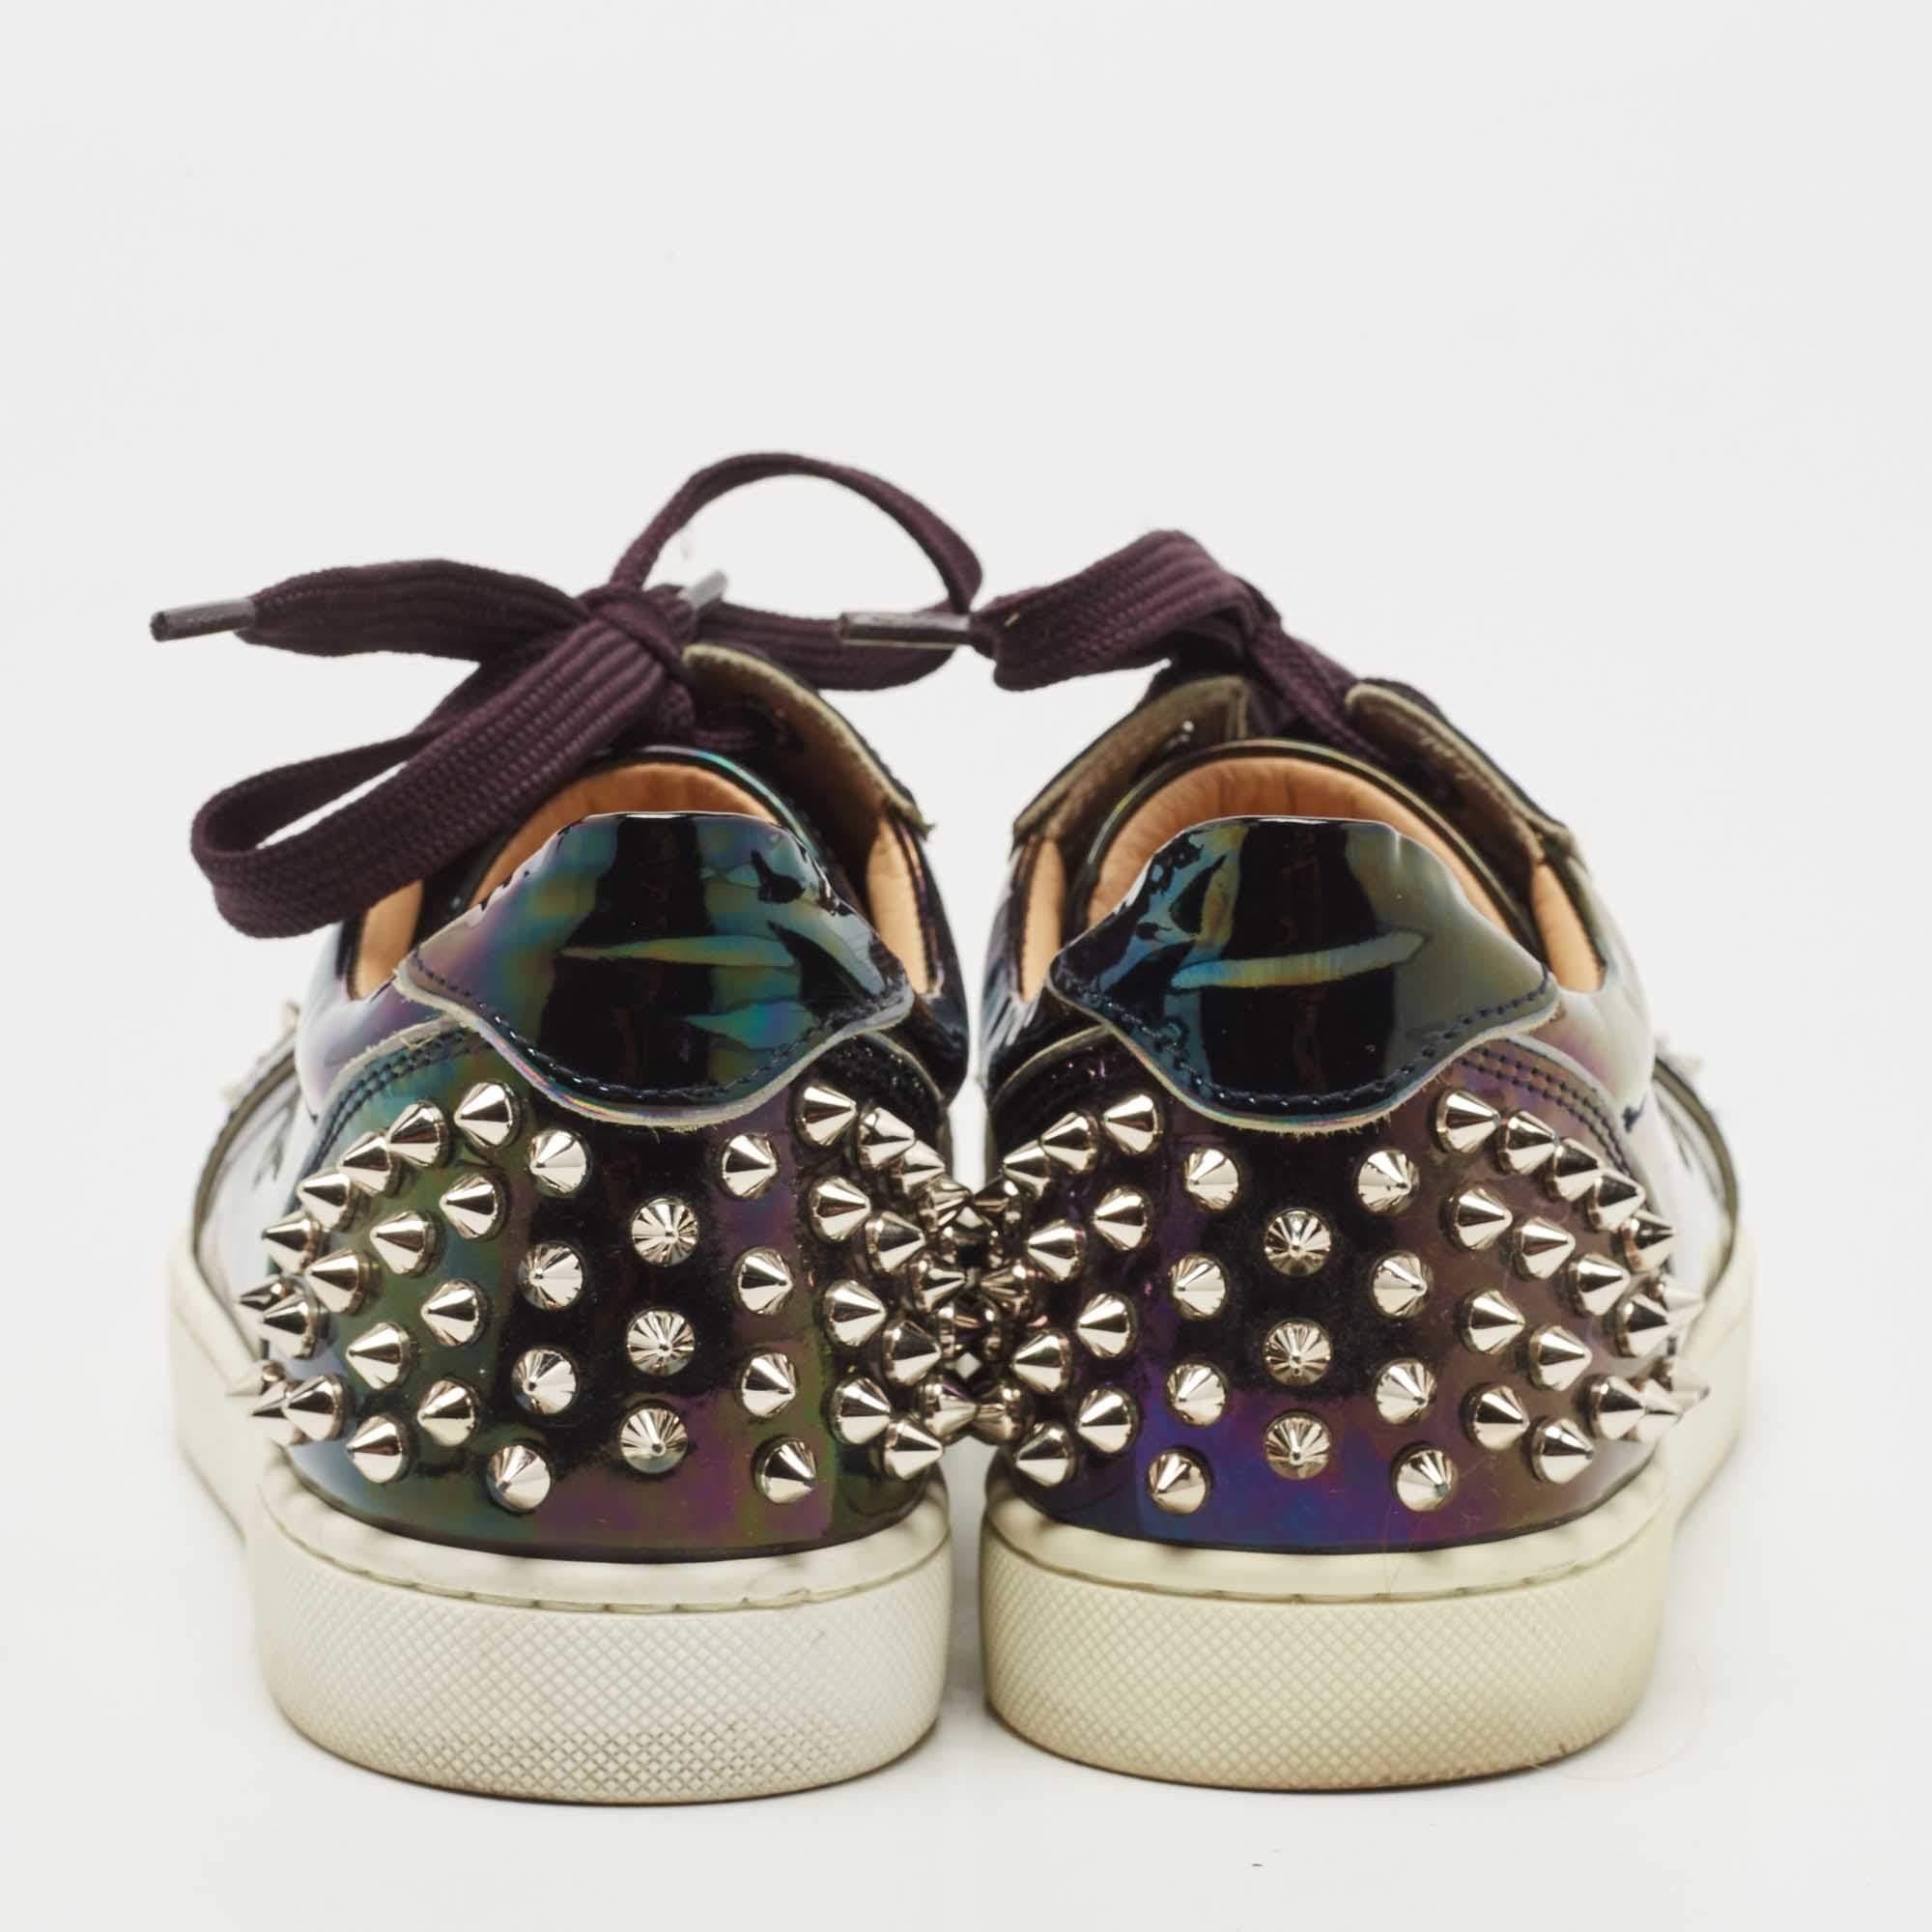 Black Christian Louboutin Holographic Patent veira Spike Low Top Sneakers Size 36.5